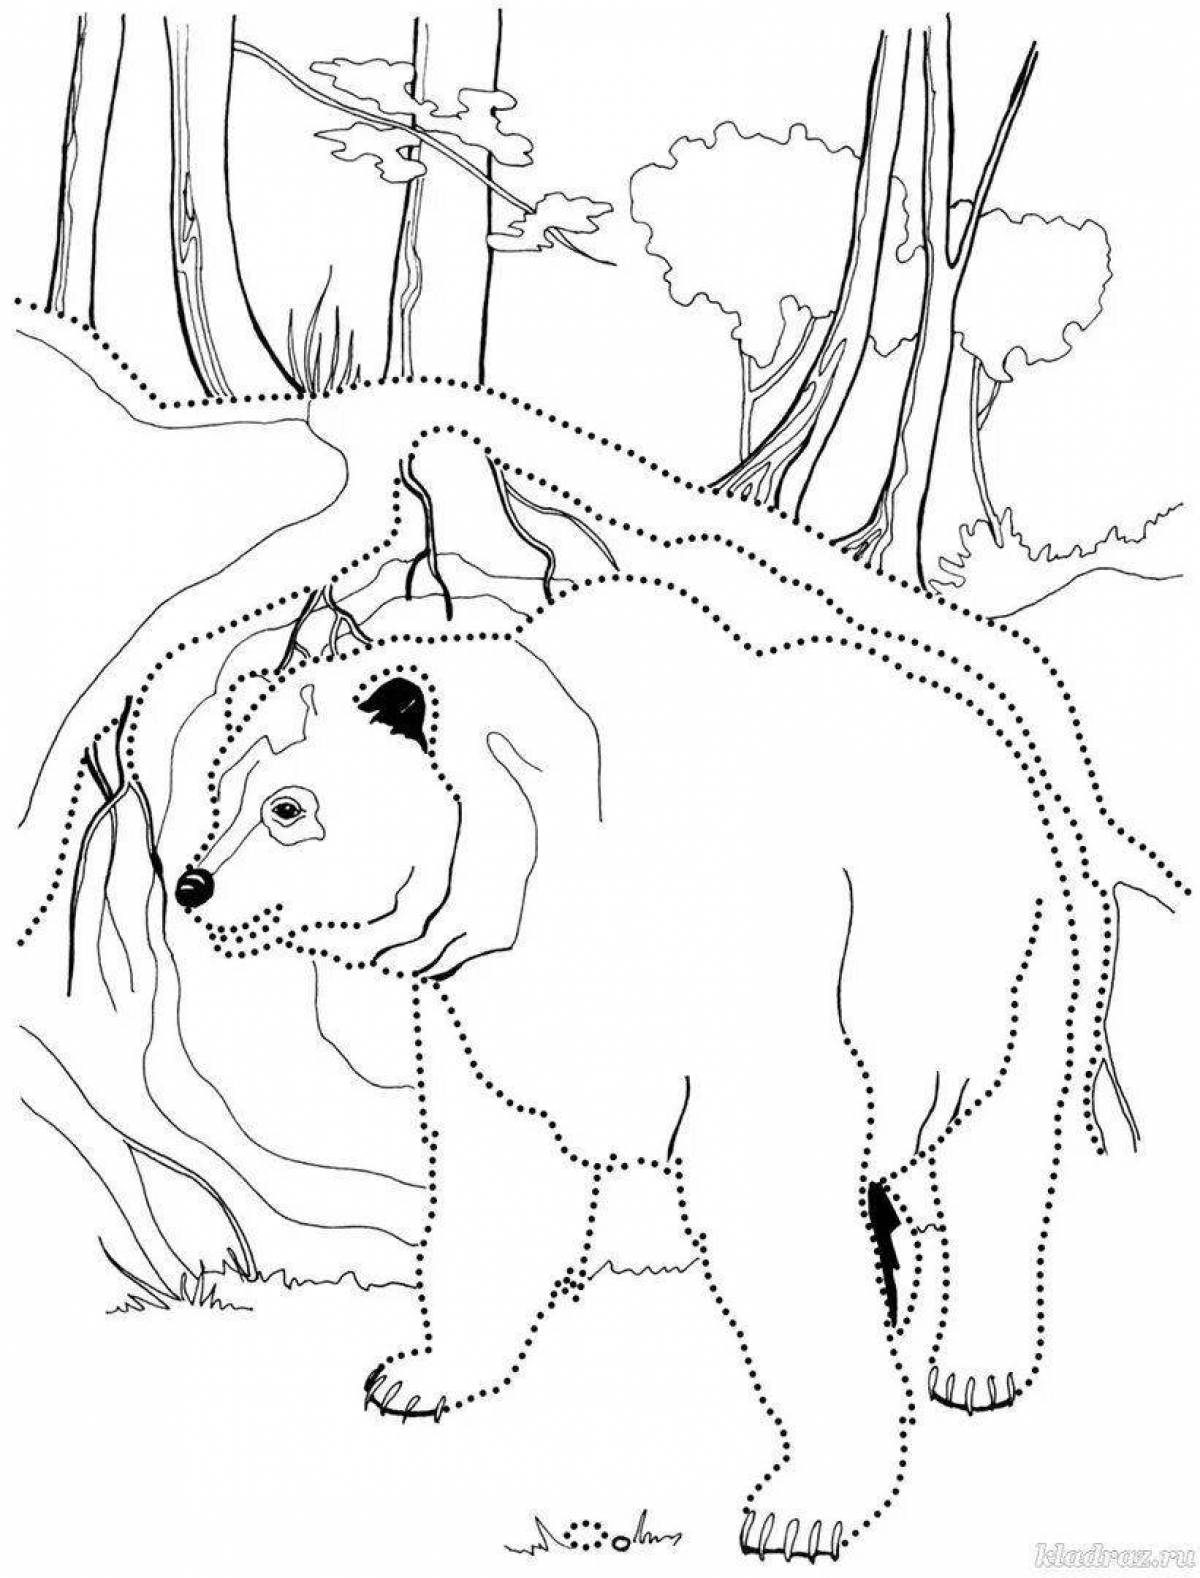 Adorable bear coloring page with polka dots